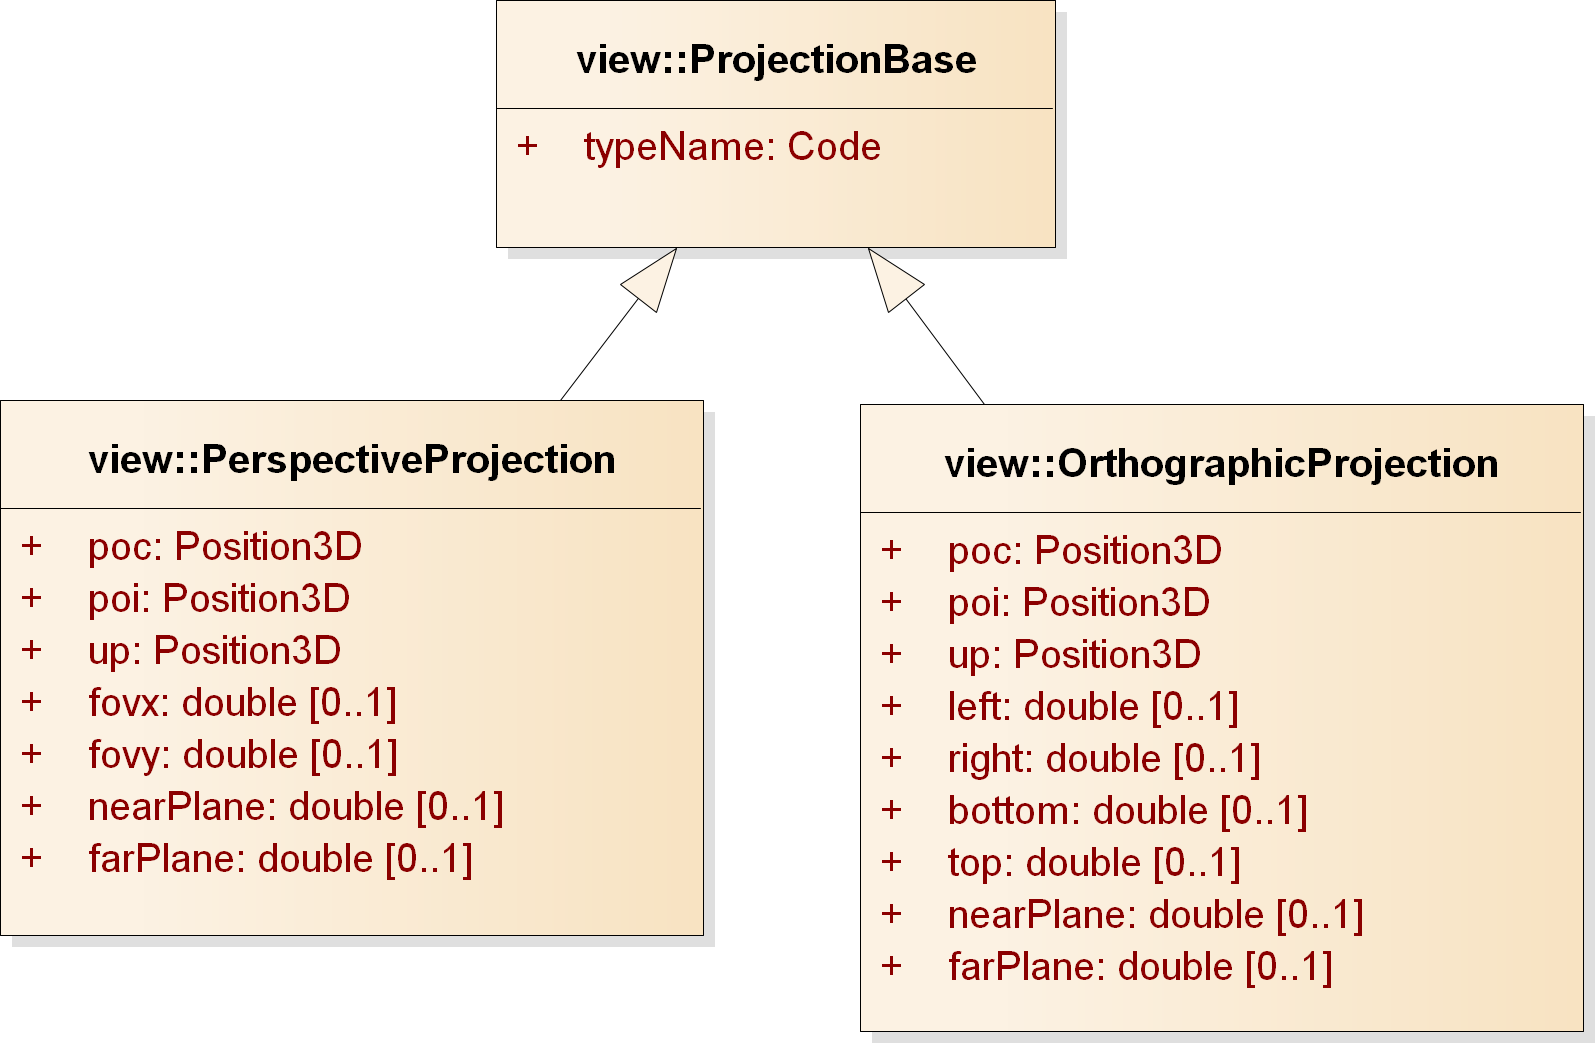 ViewProjectionTypes